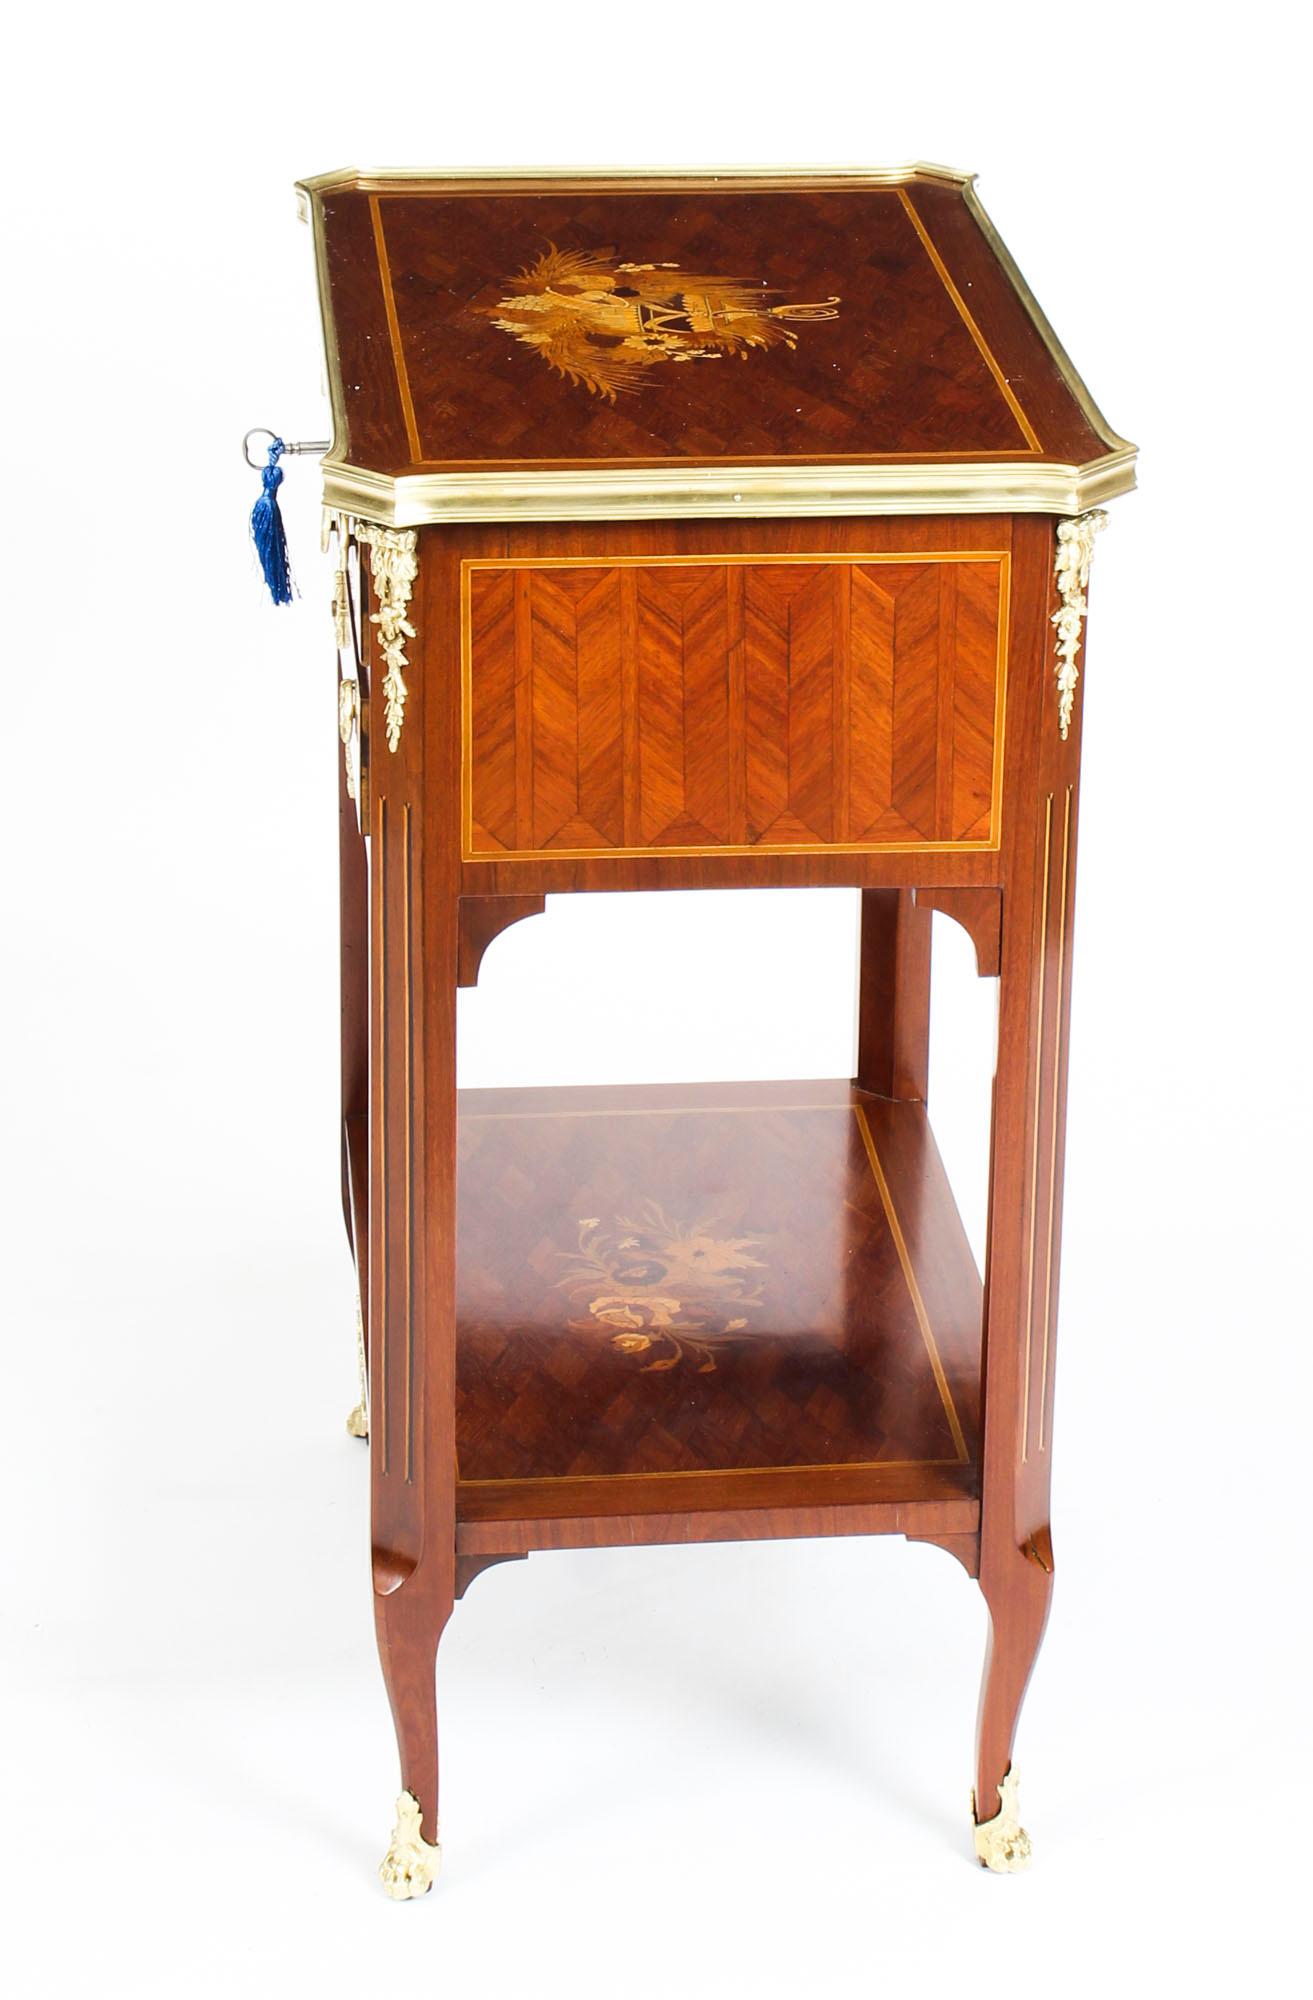 French Parquetry and Marquetry Table En Chiffonière Work Table, 19th Century For Sale 7